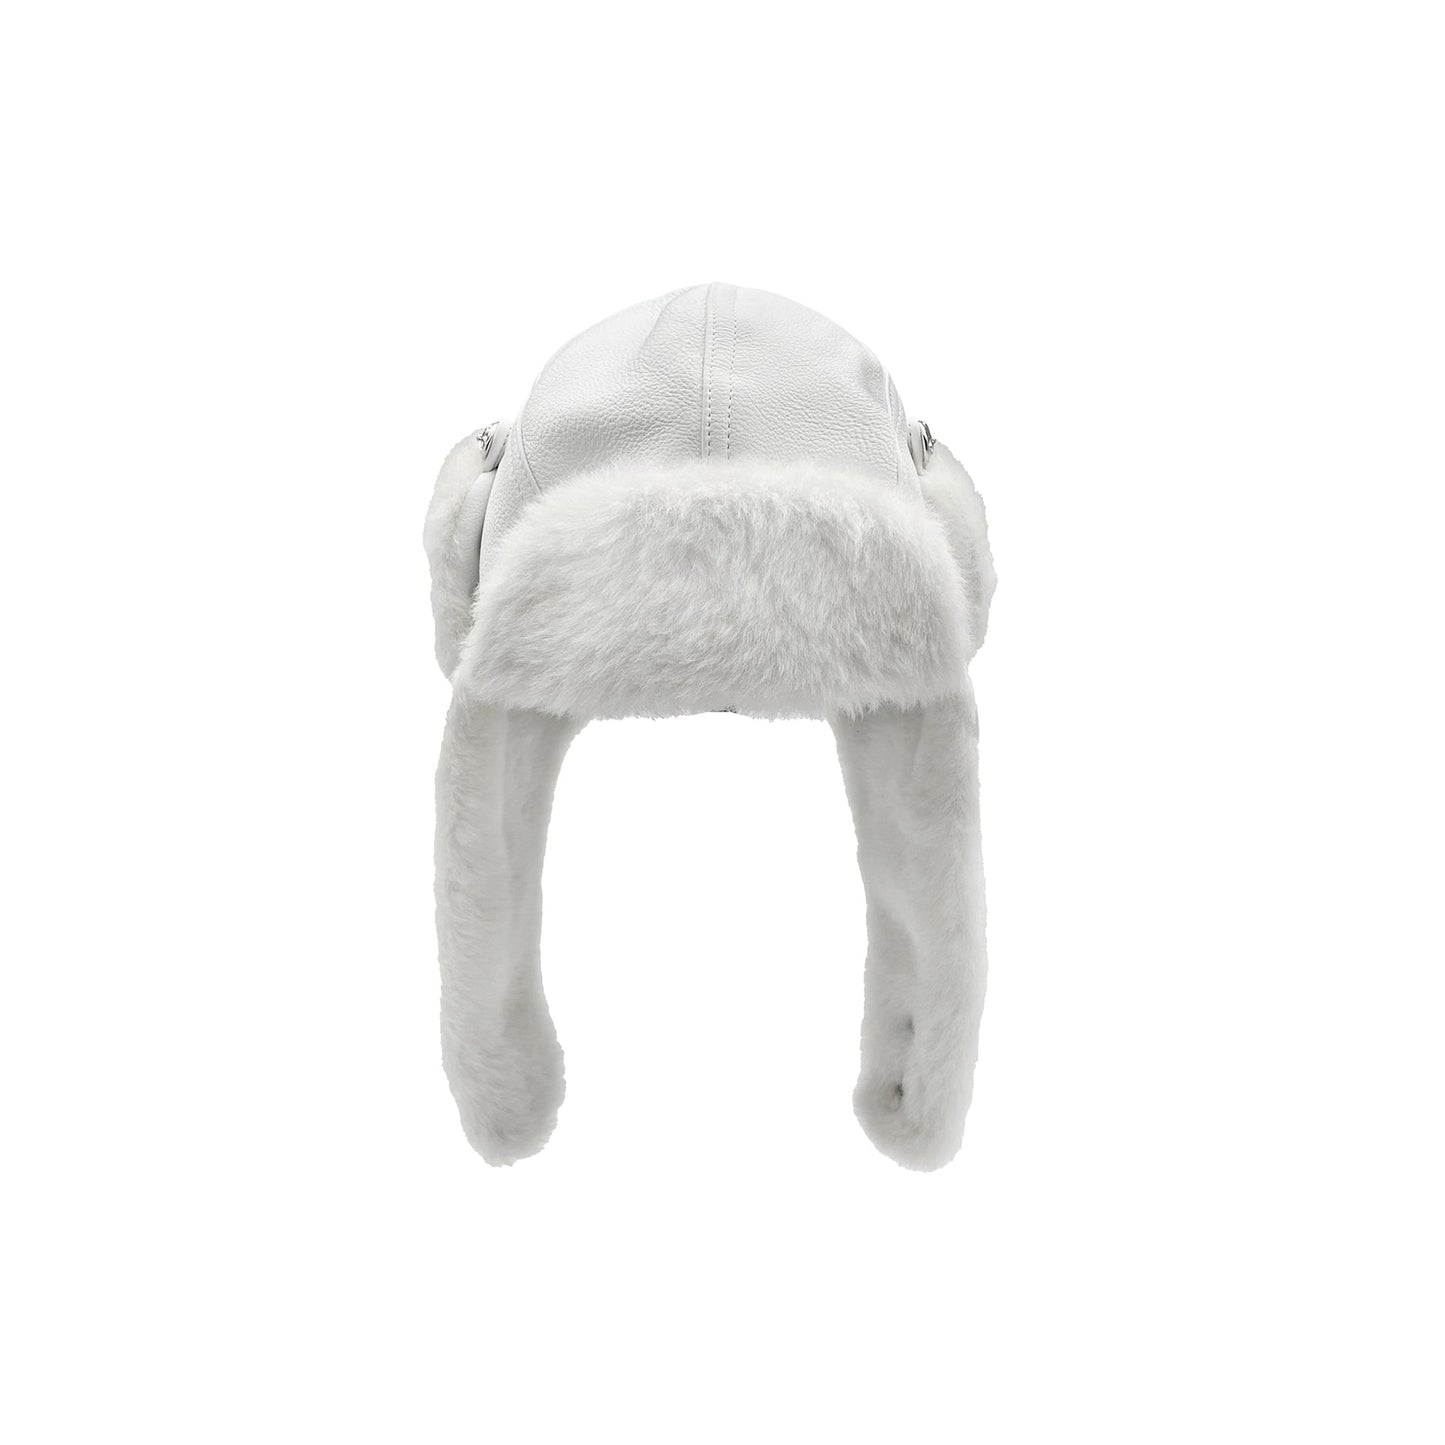 Chrome Hearts Silver Button White Fur Hat With Ear Flaps - SHENGLI ROAD MARKET